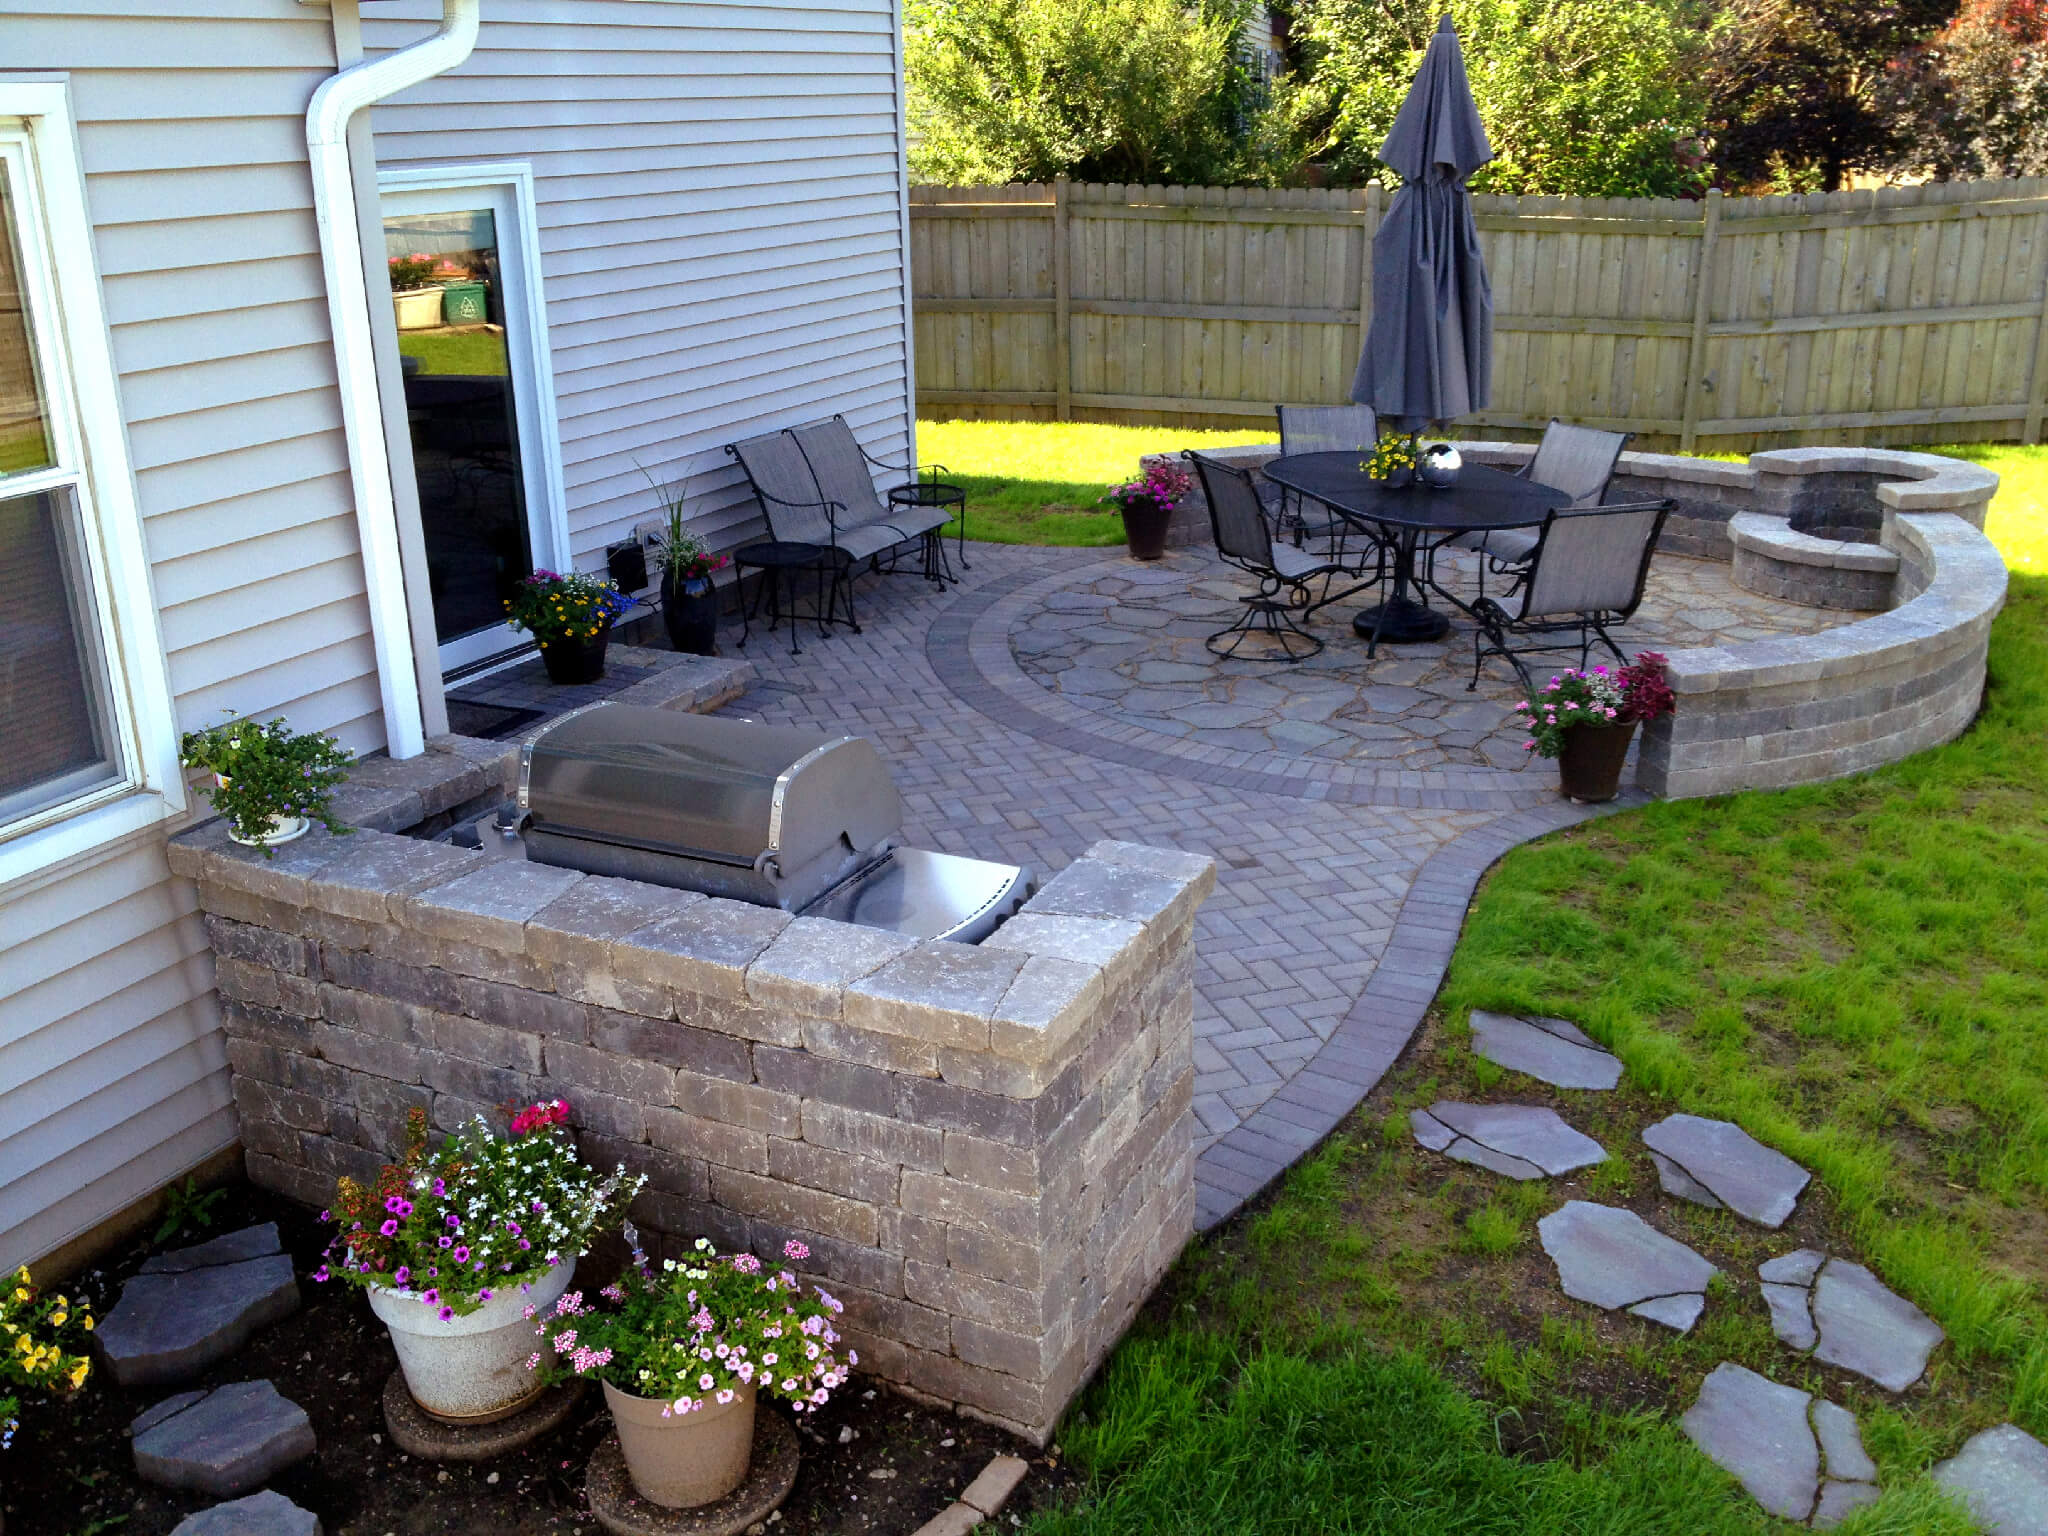 Custom paver patio with grill surround and fire pit